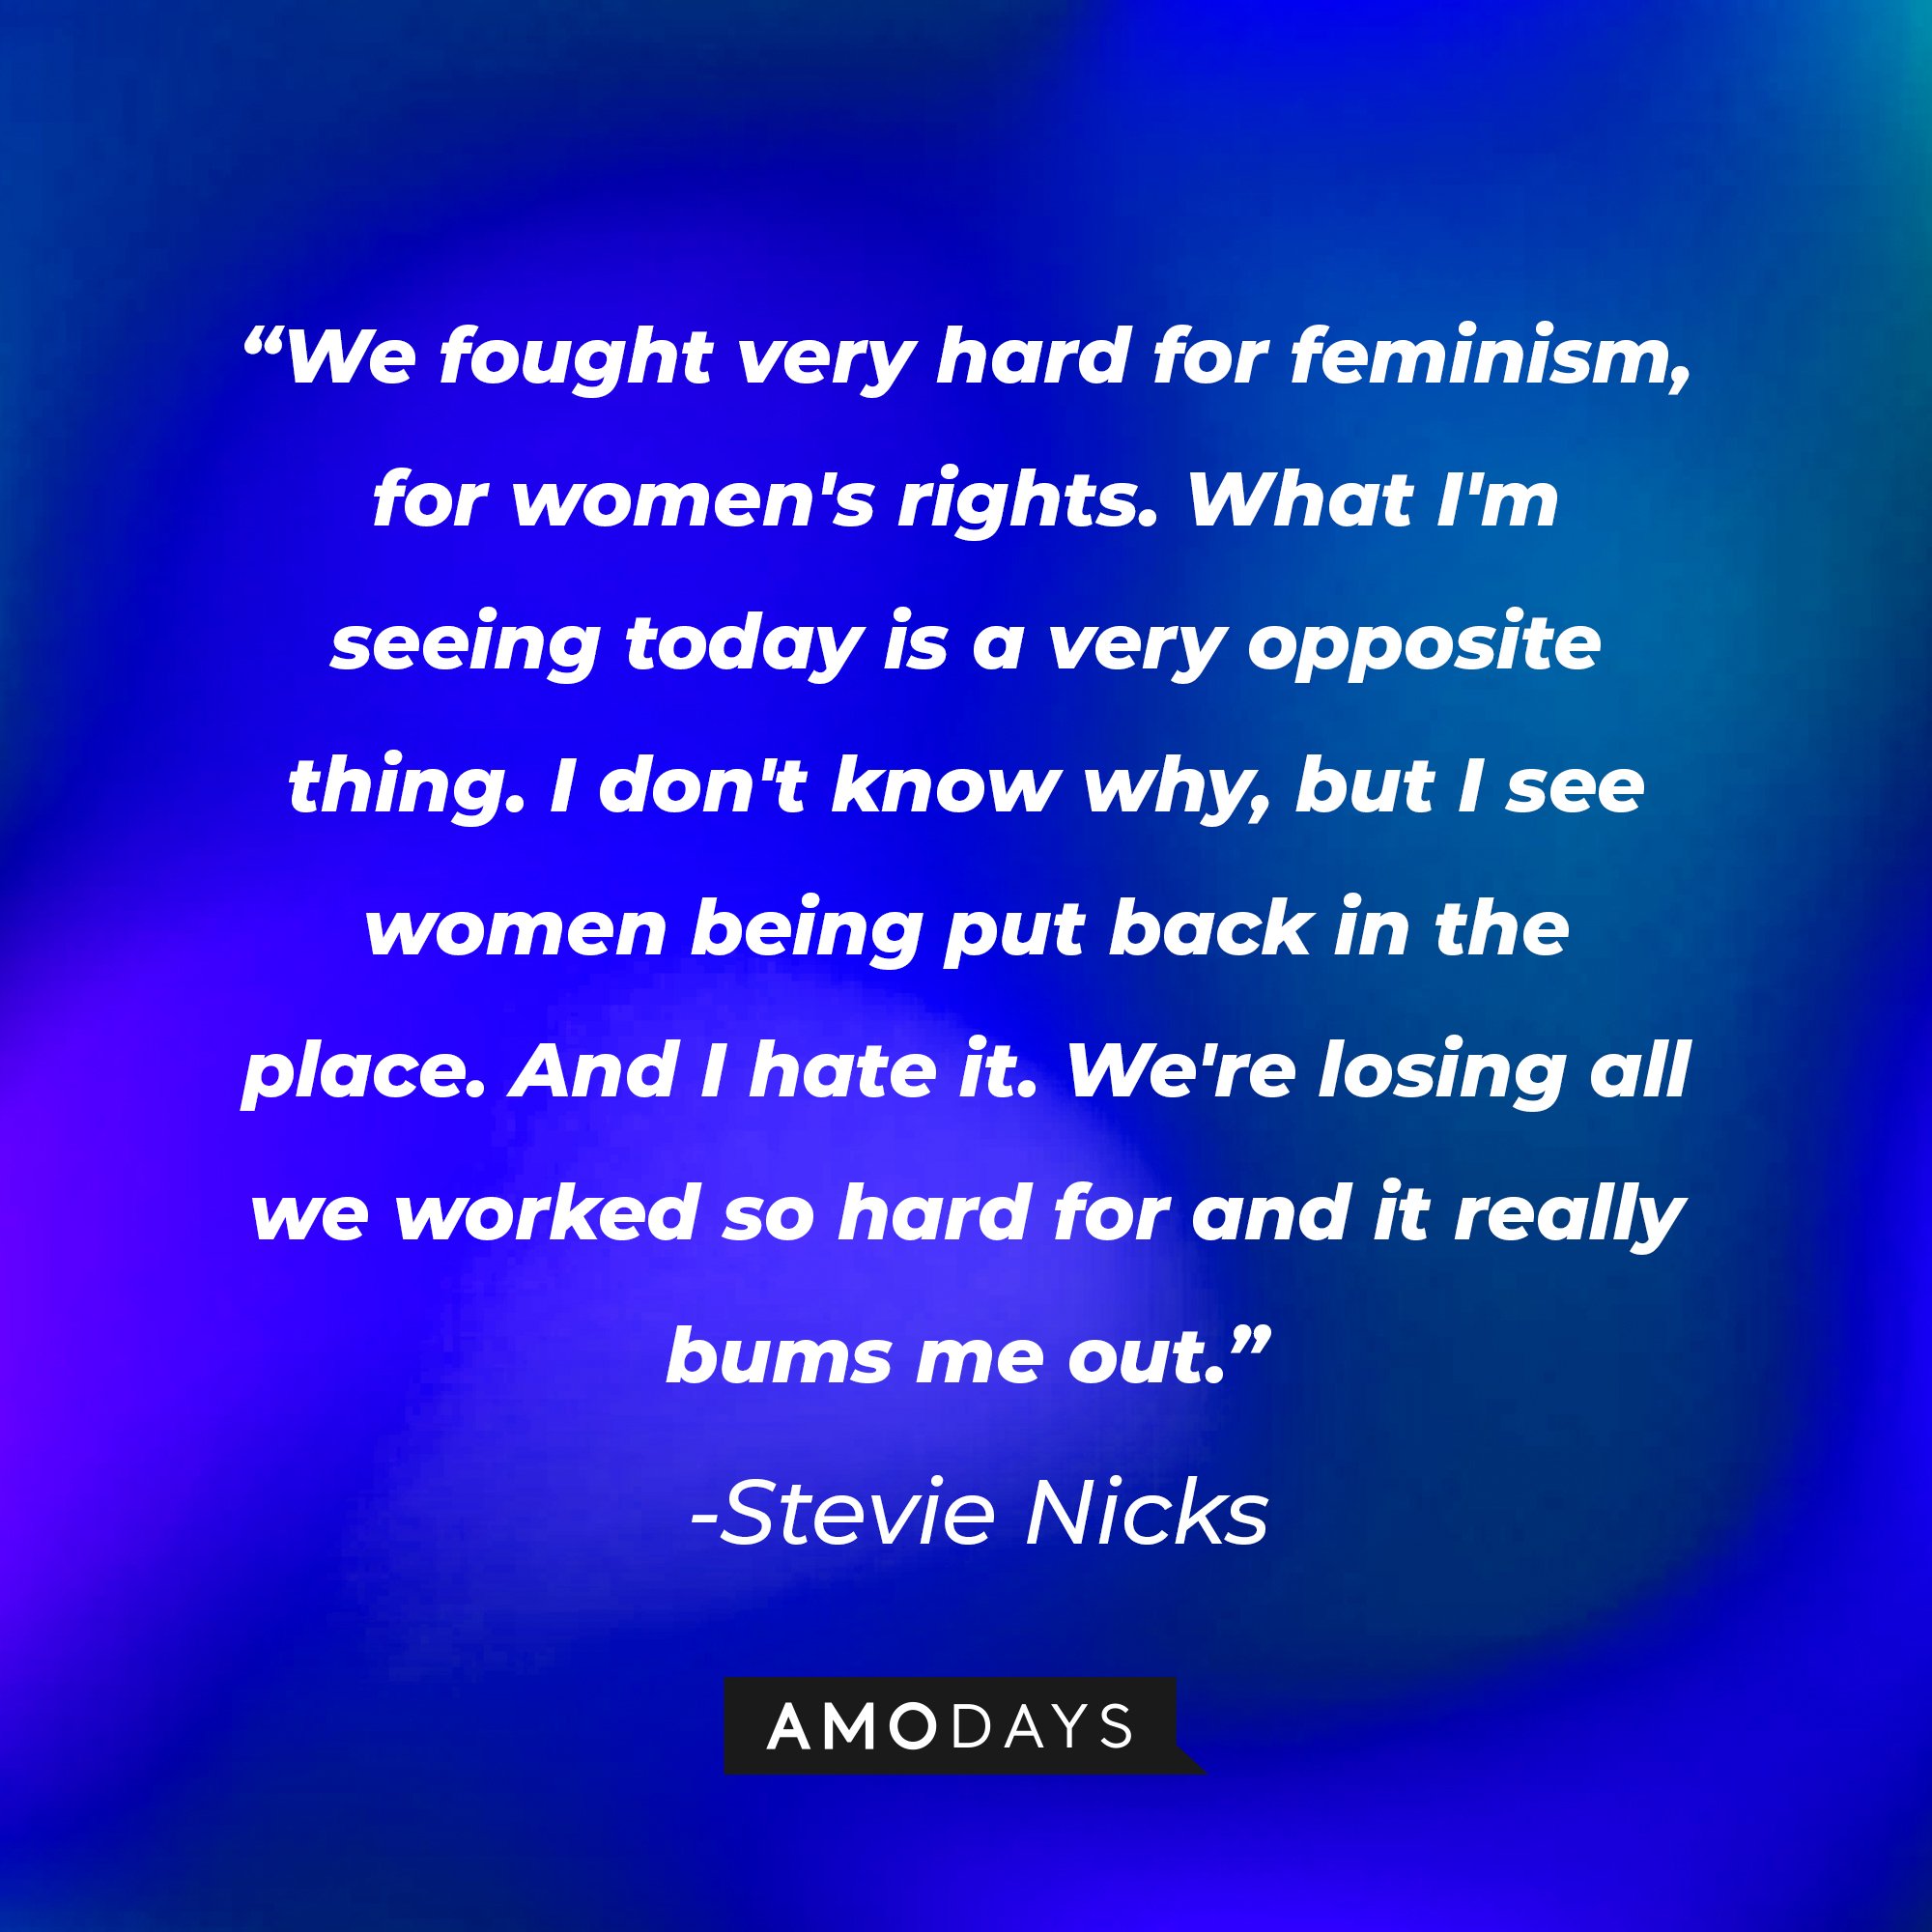 Stevie Nicks's quote: "We fought very hard for feminism, for women's rights. What I'm seeing today is a very opposite thing. I don't know why, but I see women being put back in the place. And I hate it. We're losing all we worked so hard for and it really bums me out." | Image: AmoDays